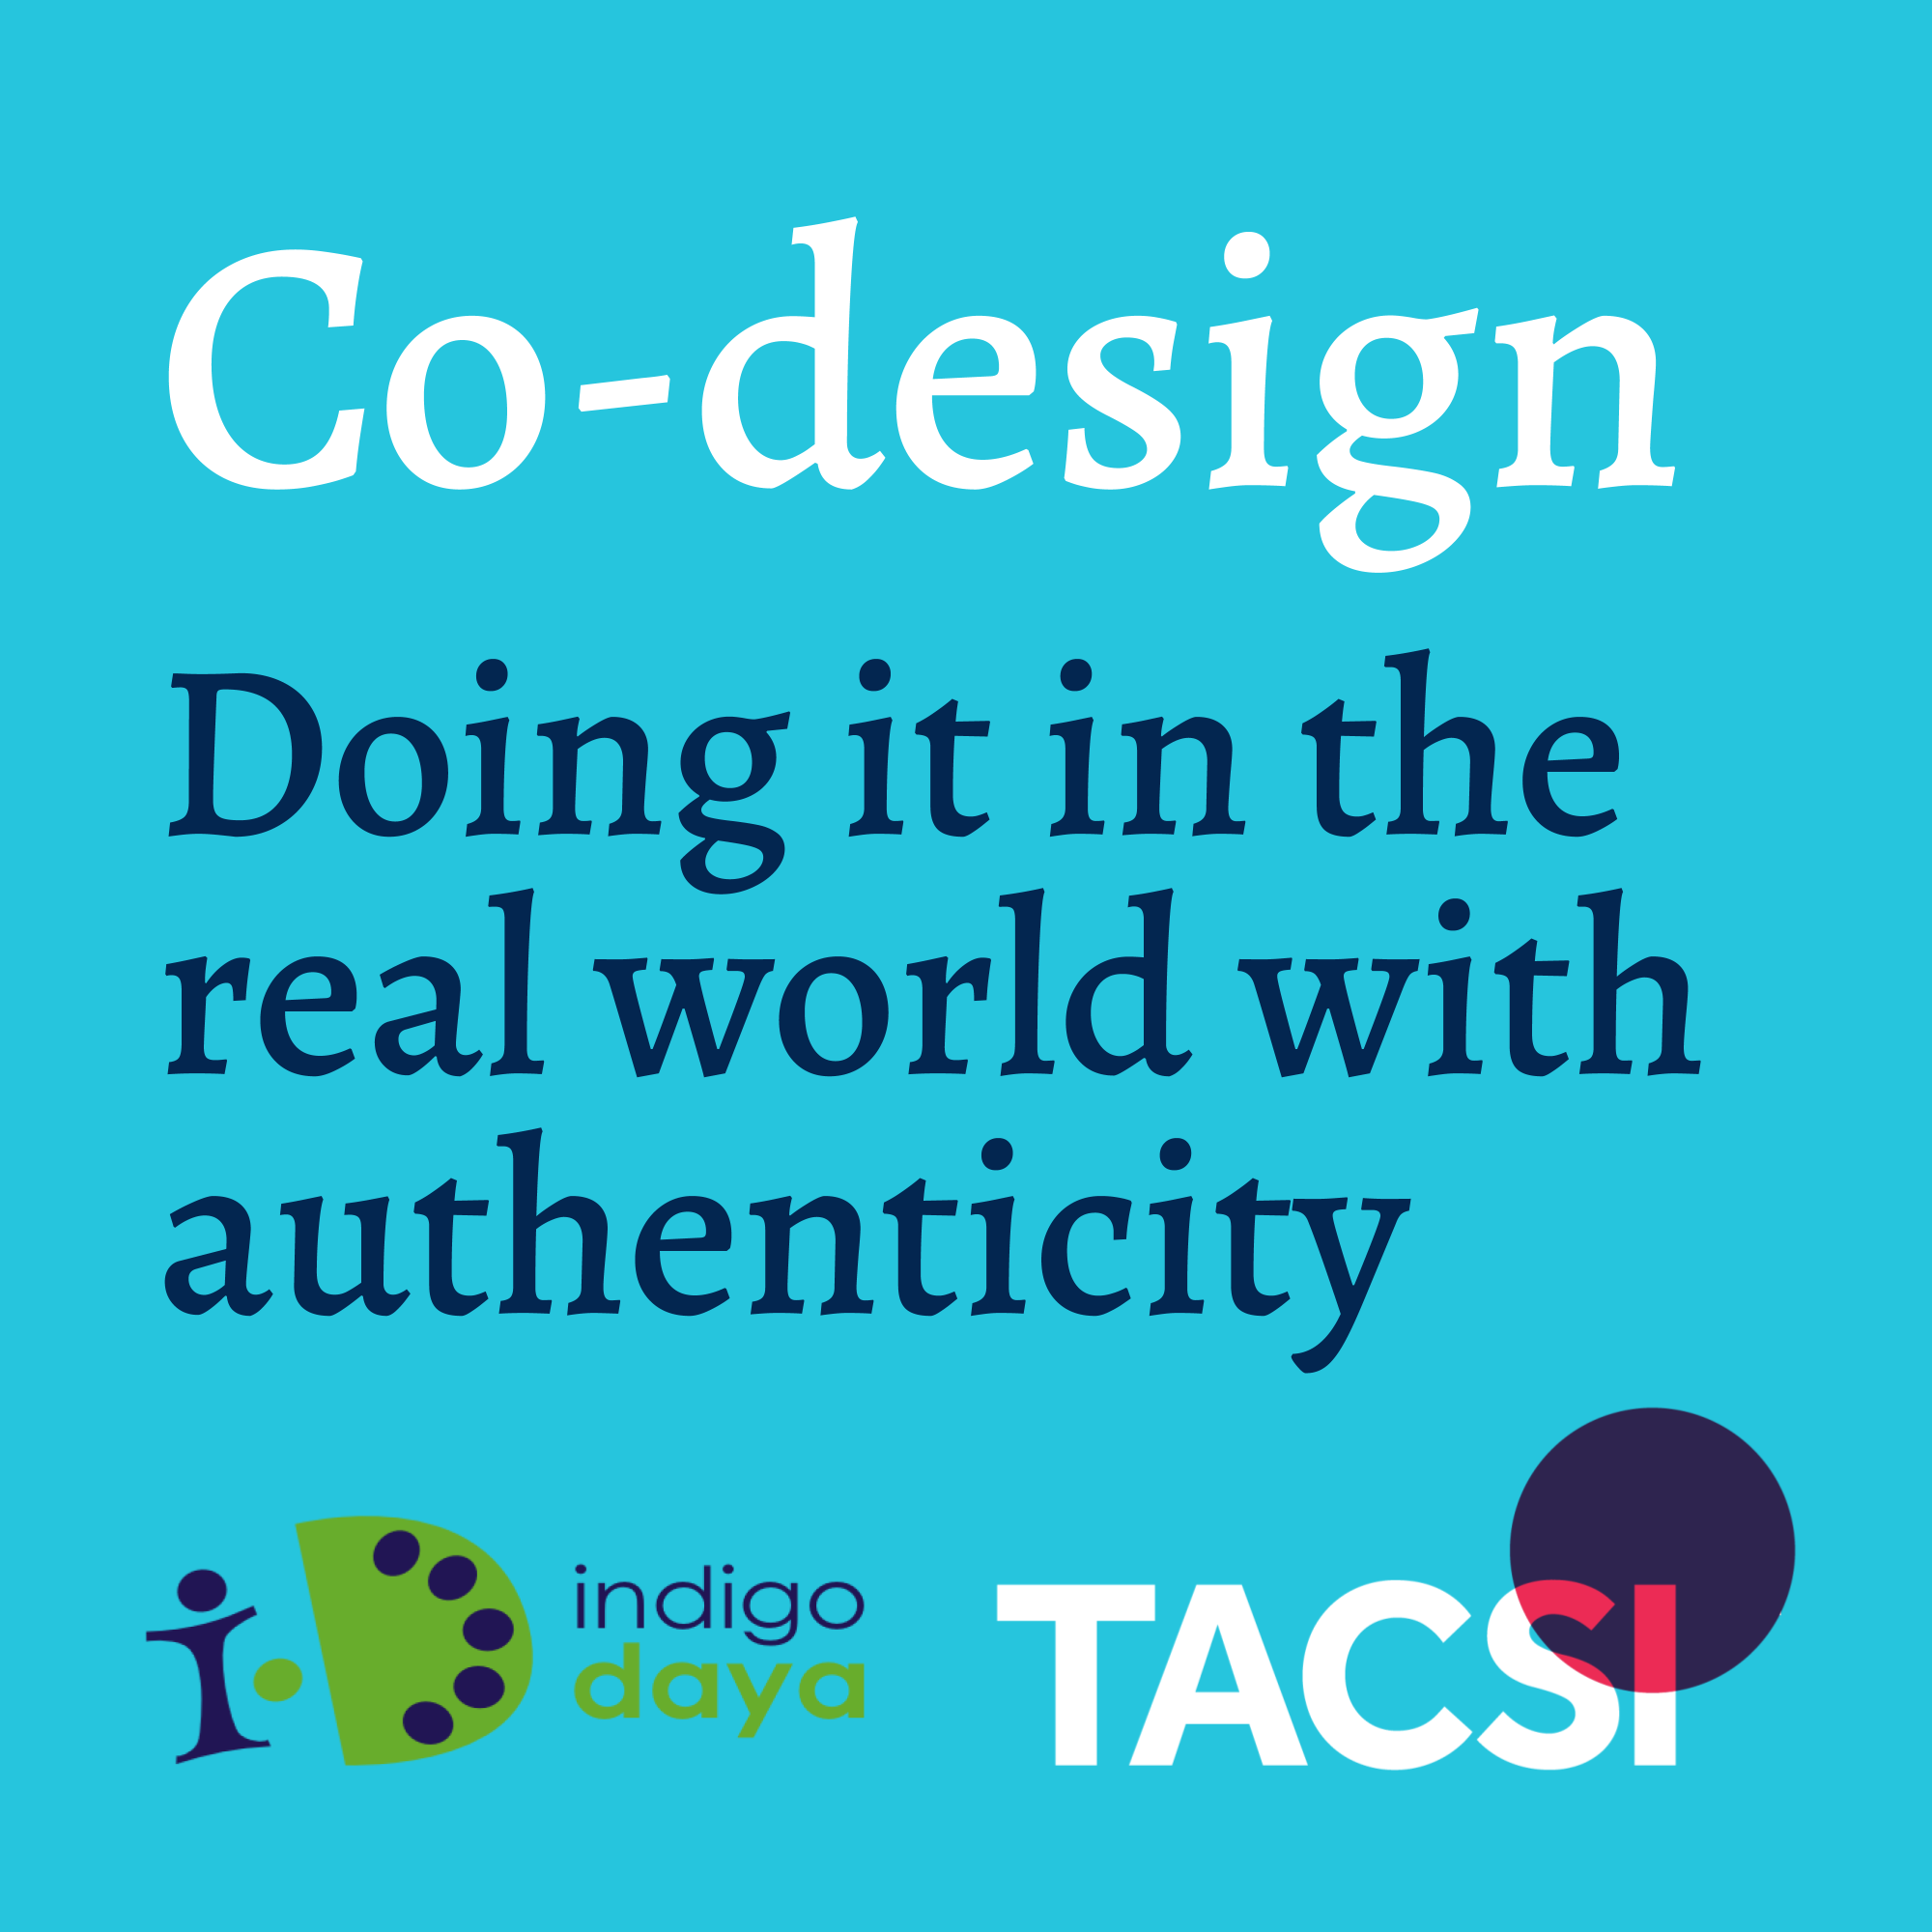 1. Introduction to co-design